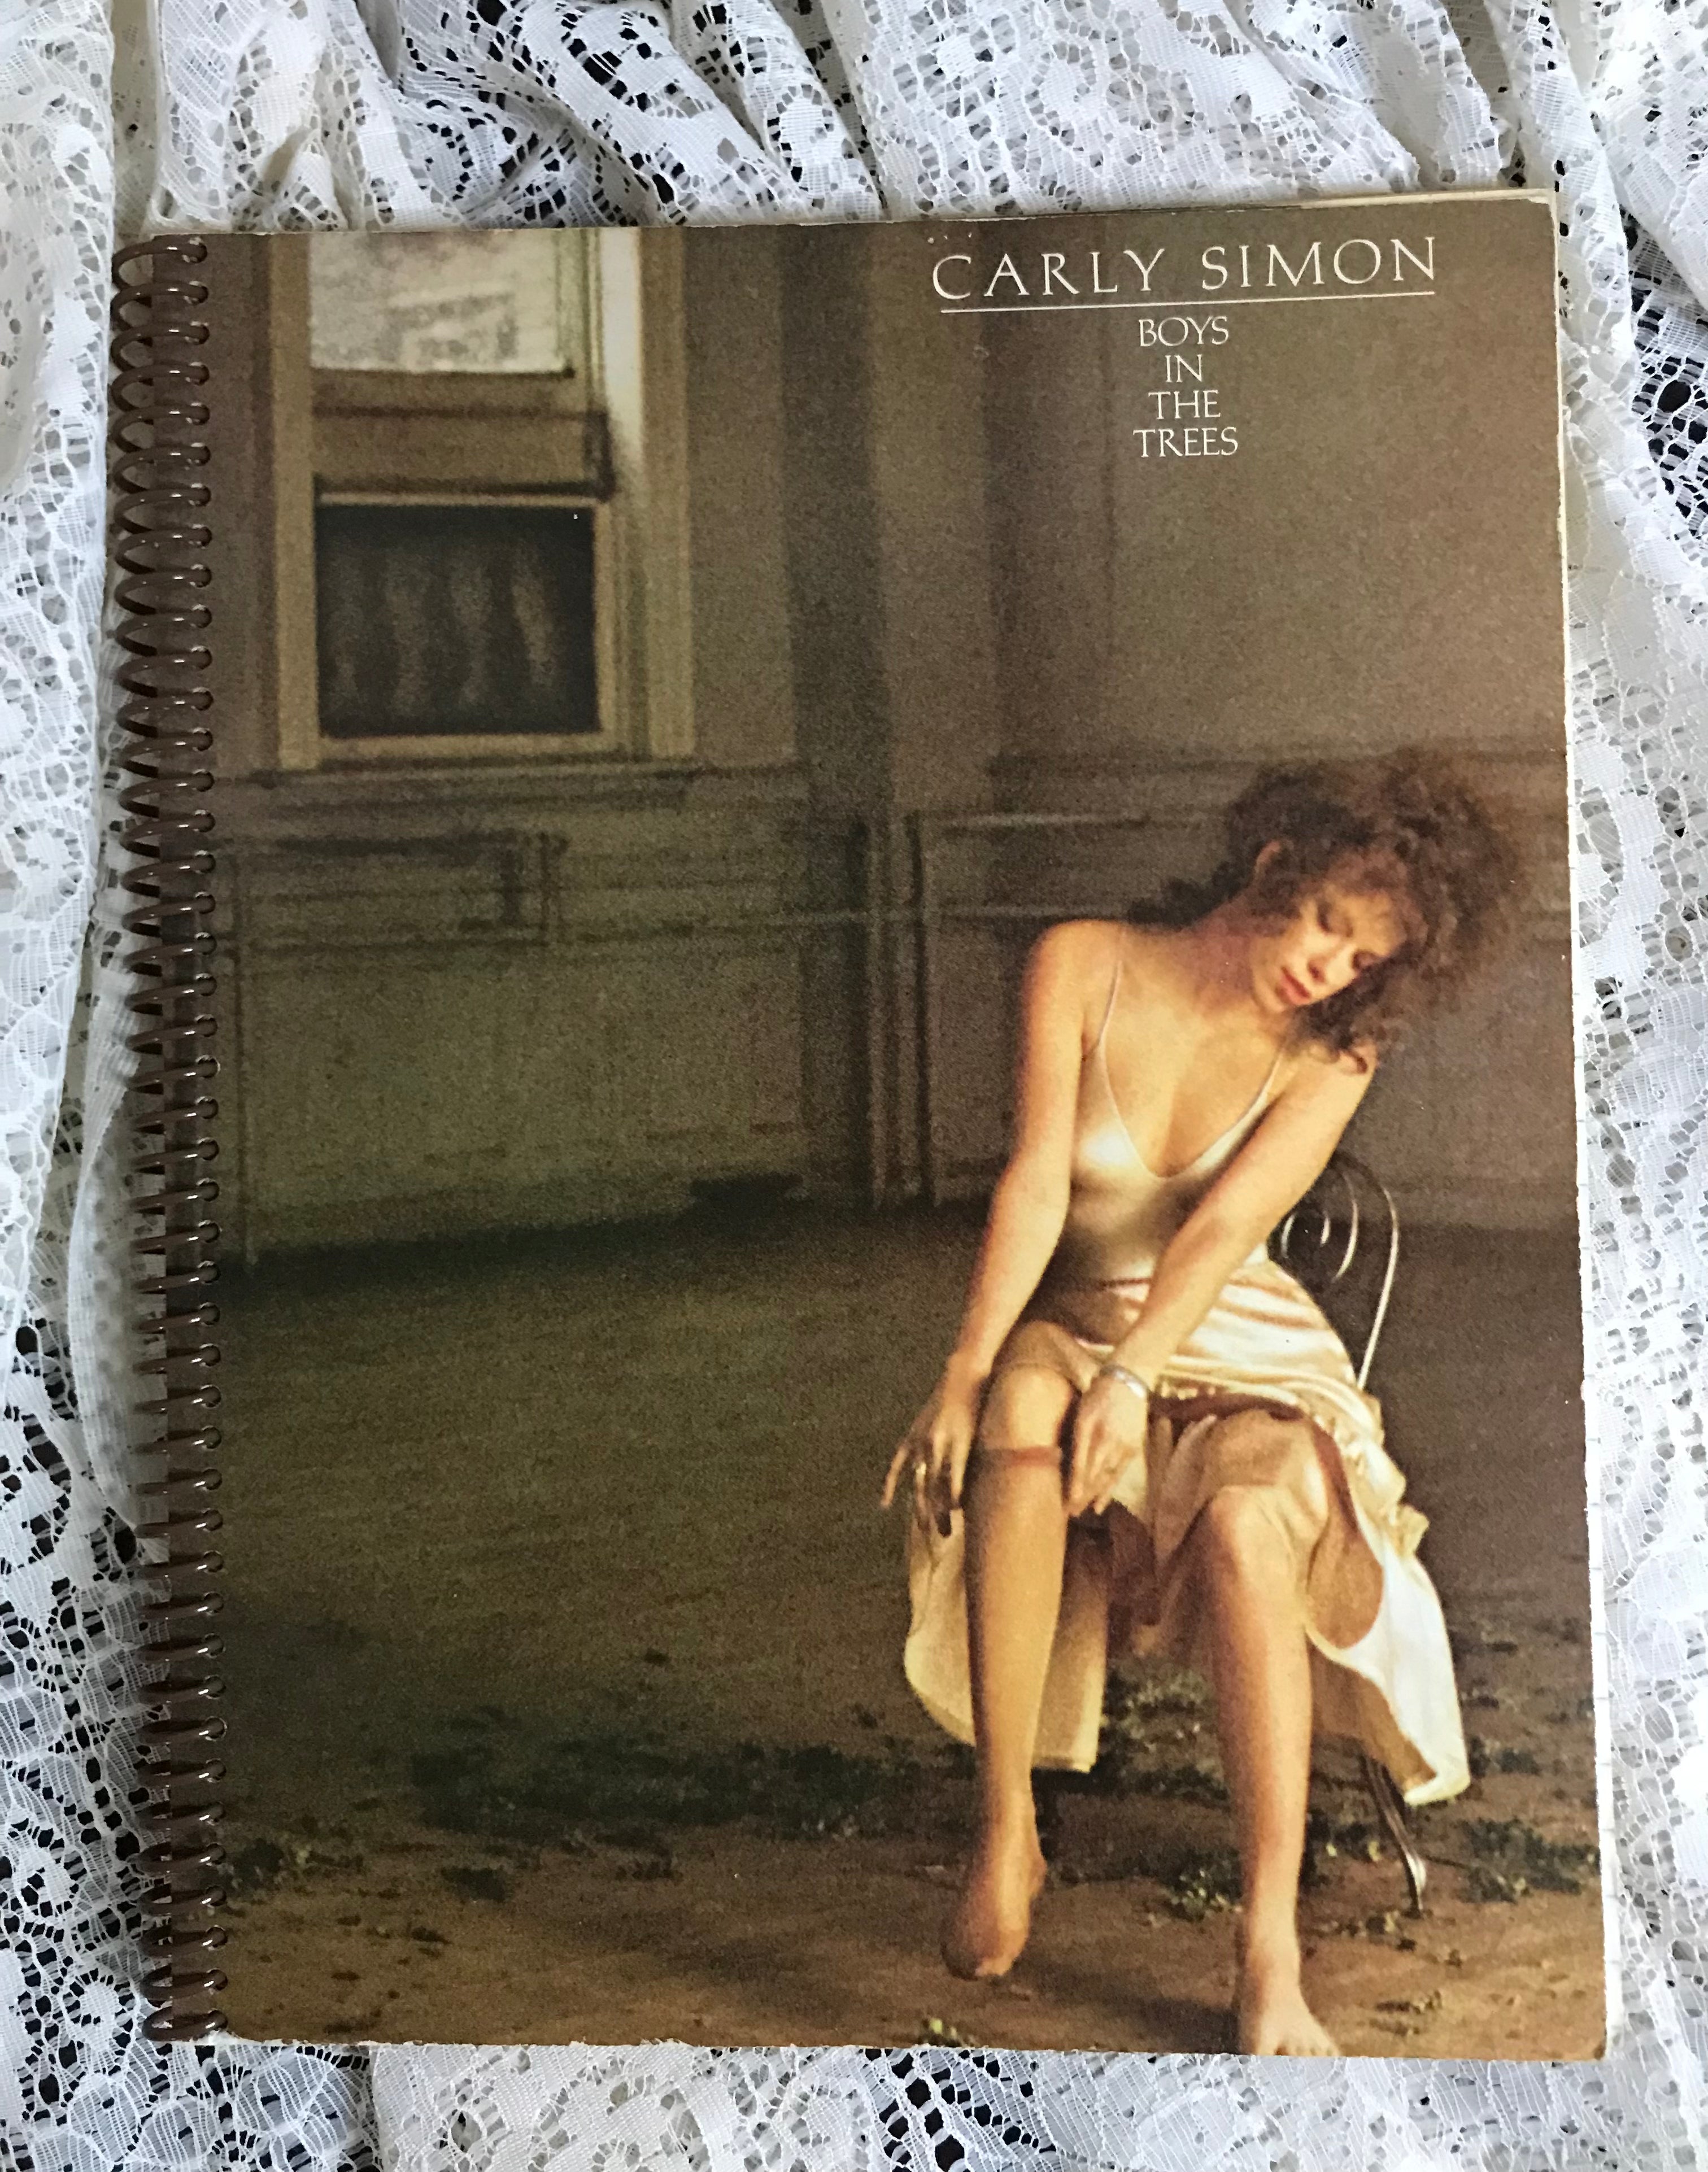 Carly Simon Boys in the Trees Album Cover Notebook